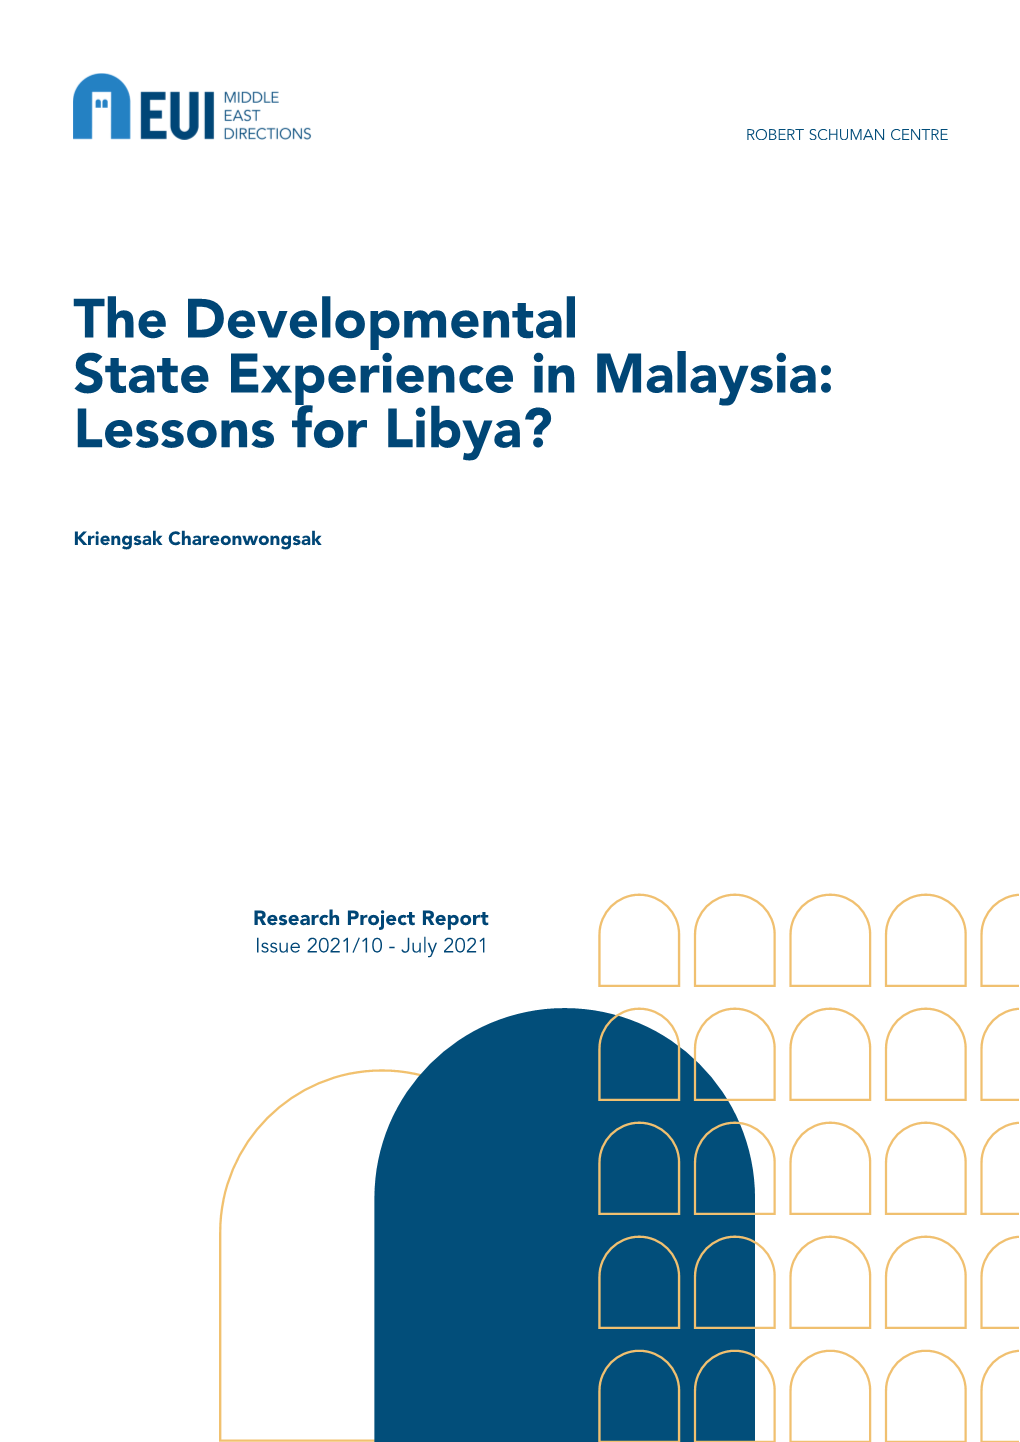 The Developmental State Experience in Malaysia: Lessons for Libya?